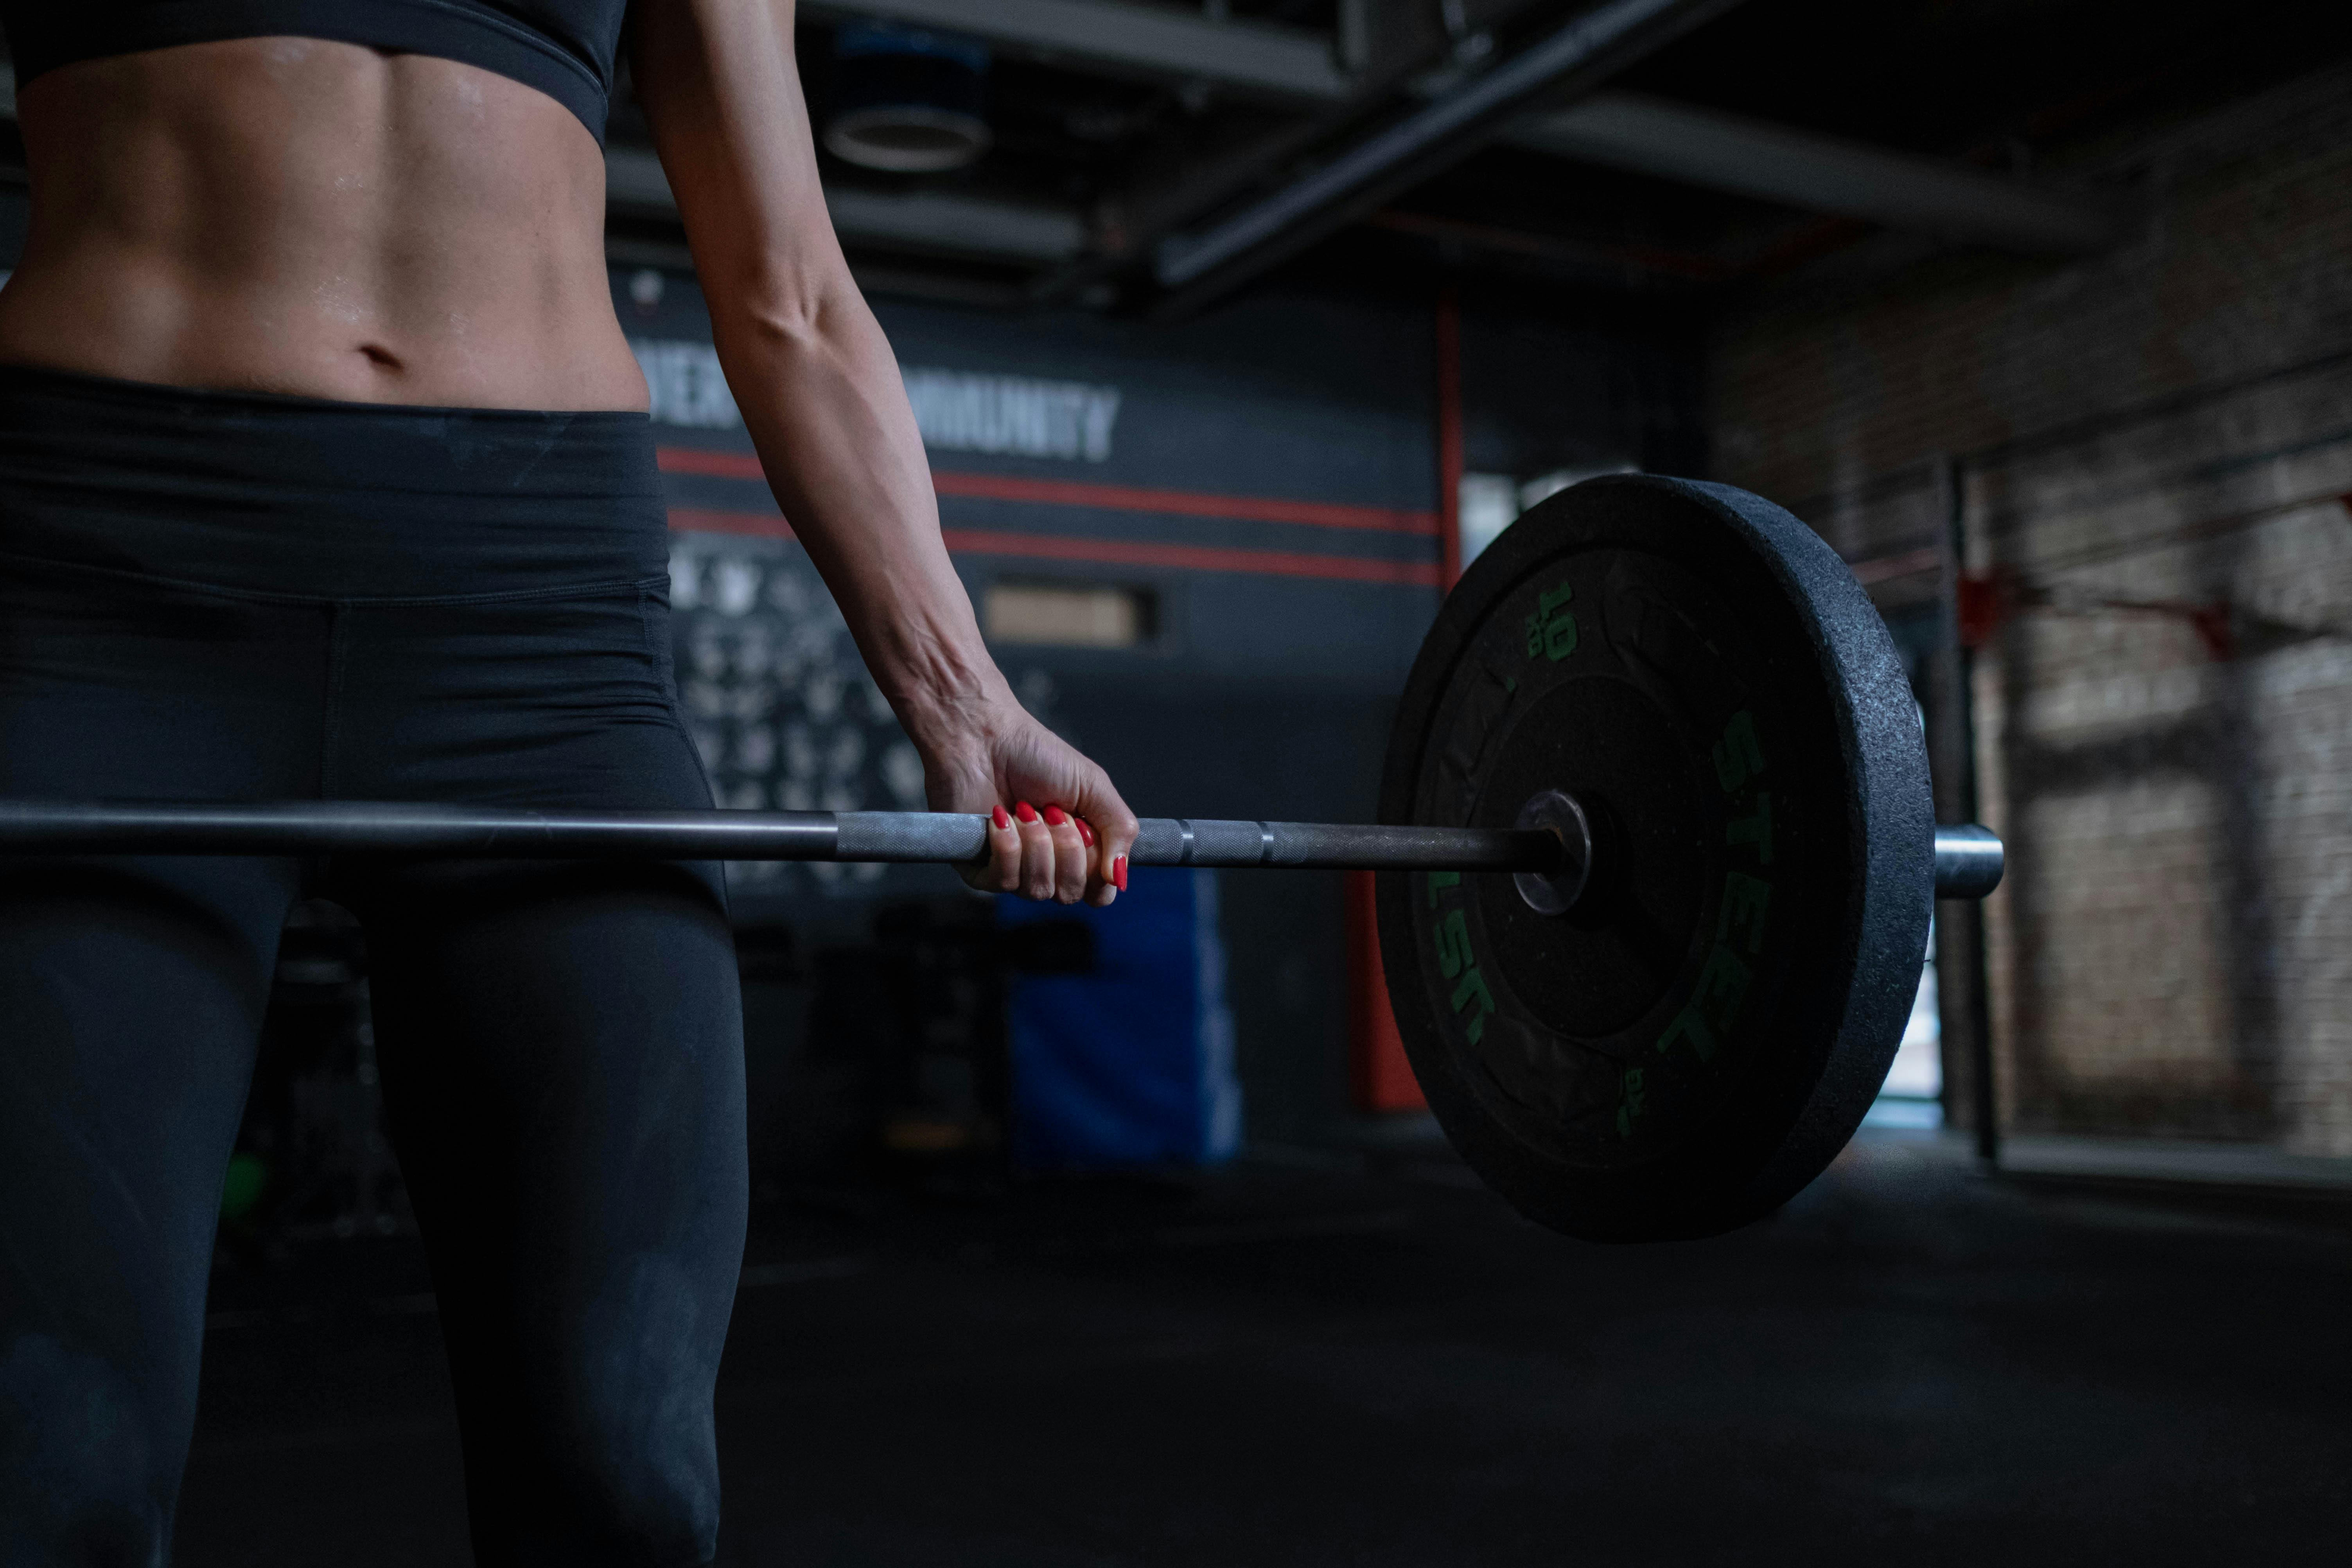 Overcome a Plateau in Your Weightlifting Progress